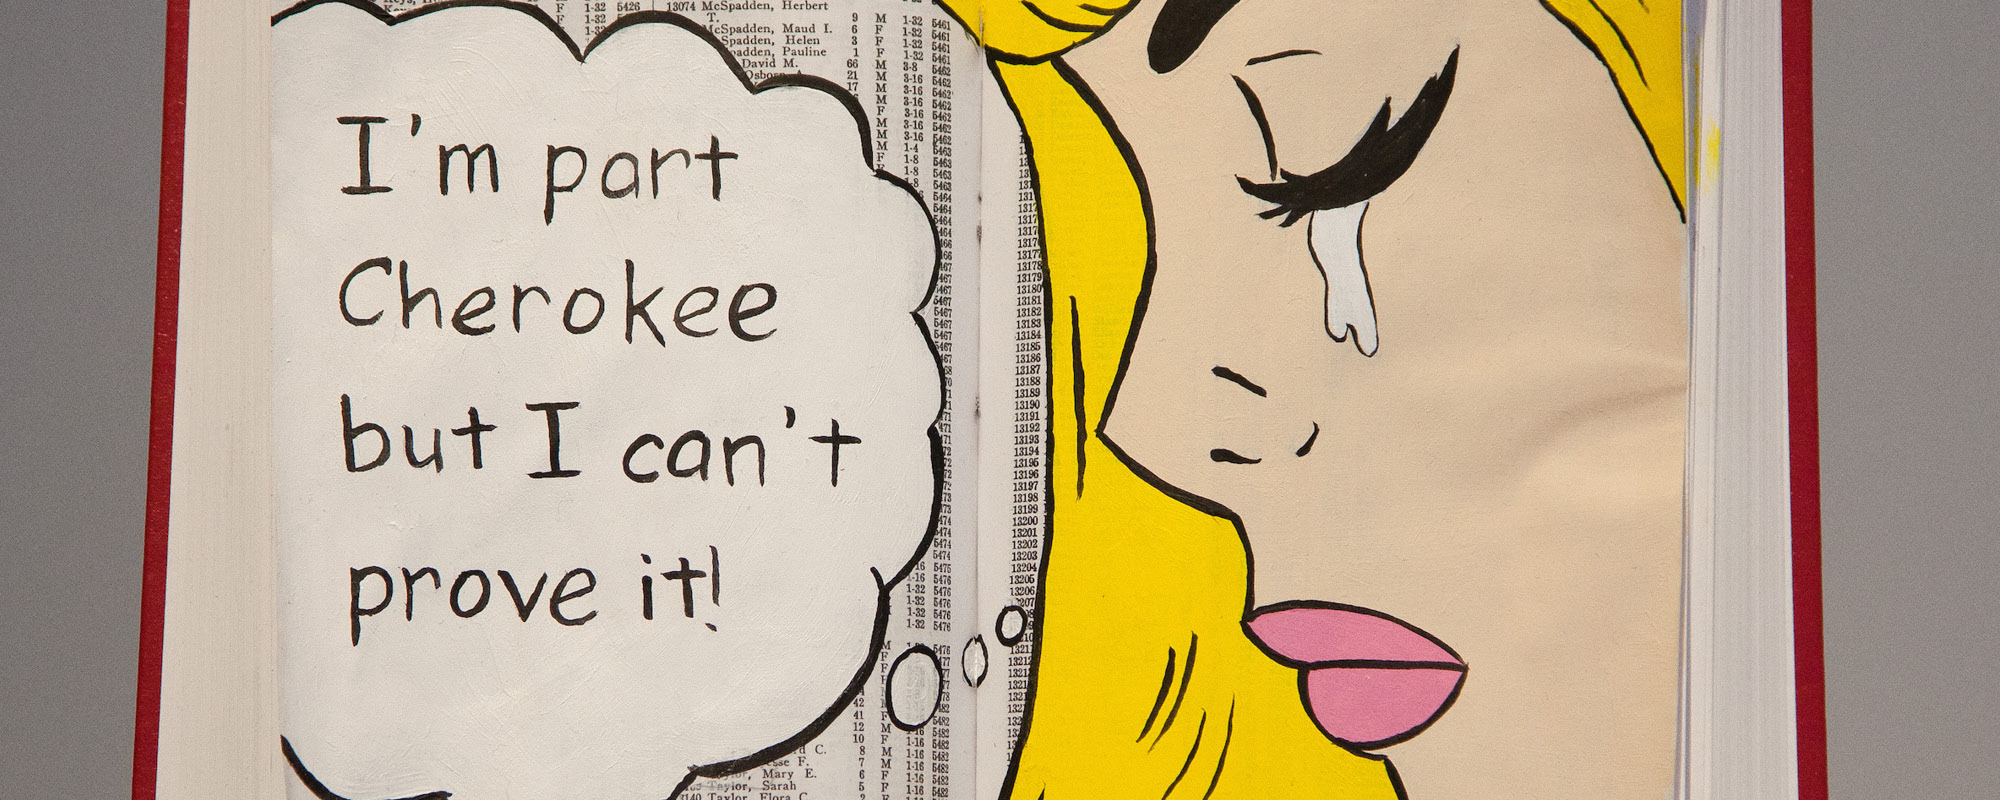 Painting inside of an open book. Woman with blonde hair is crying. Talk bubble reads, "I'm part Cherokee but I can't prove it."